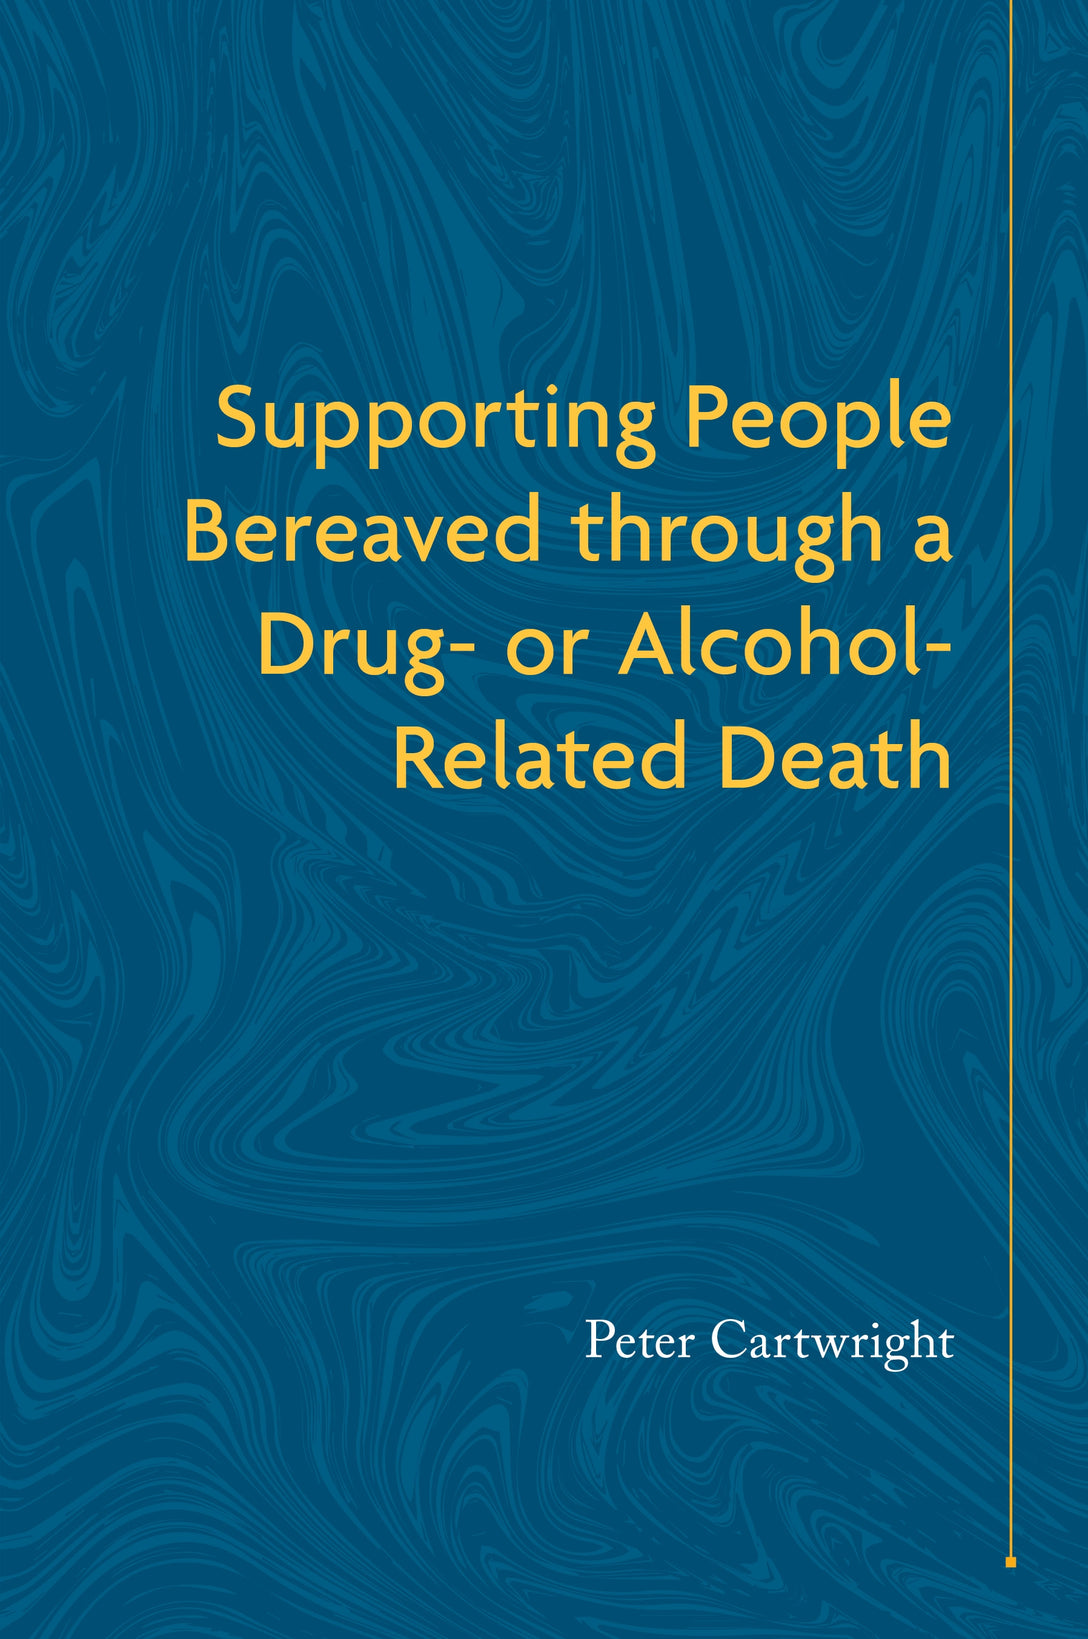 Supporting People Bereaved through a Drug- or Alcohol-Related Death by Peter Cartwright, No Author Listed